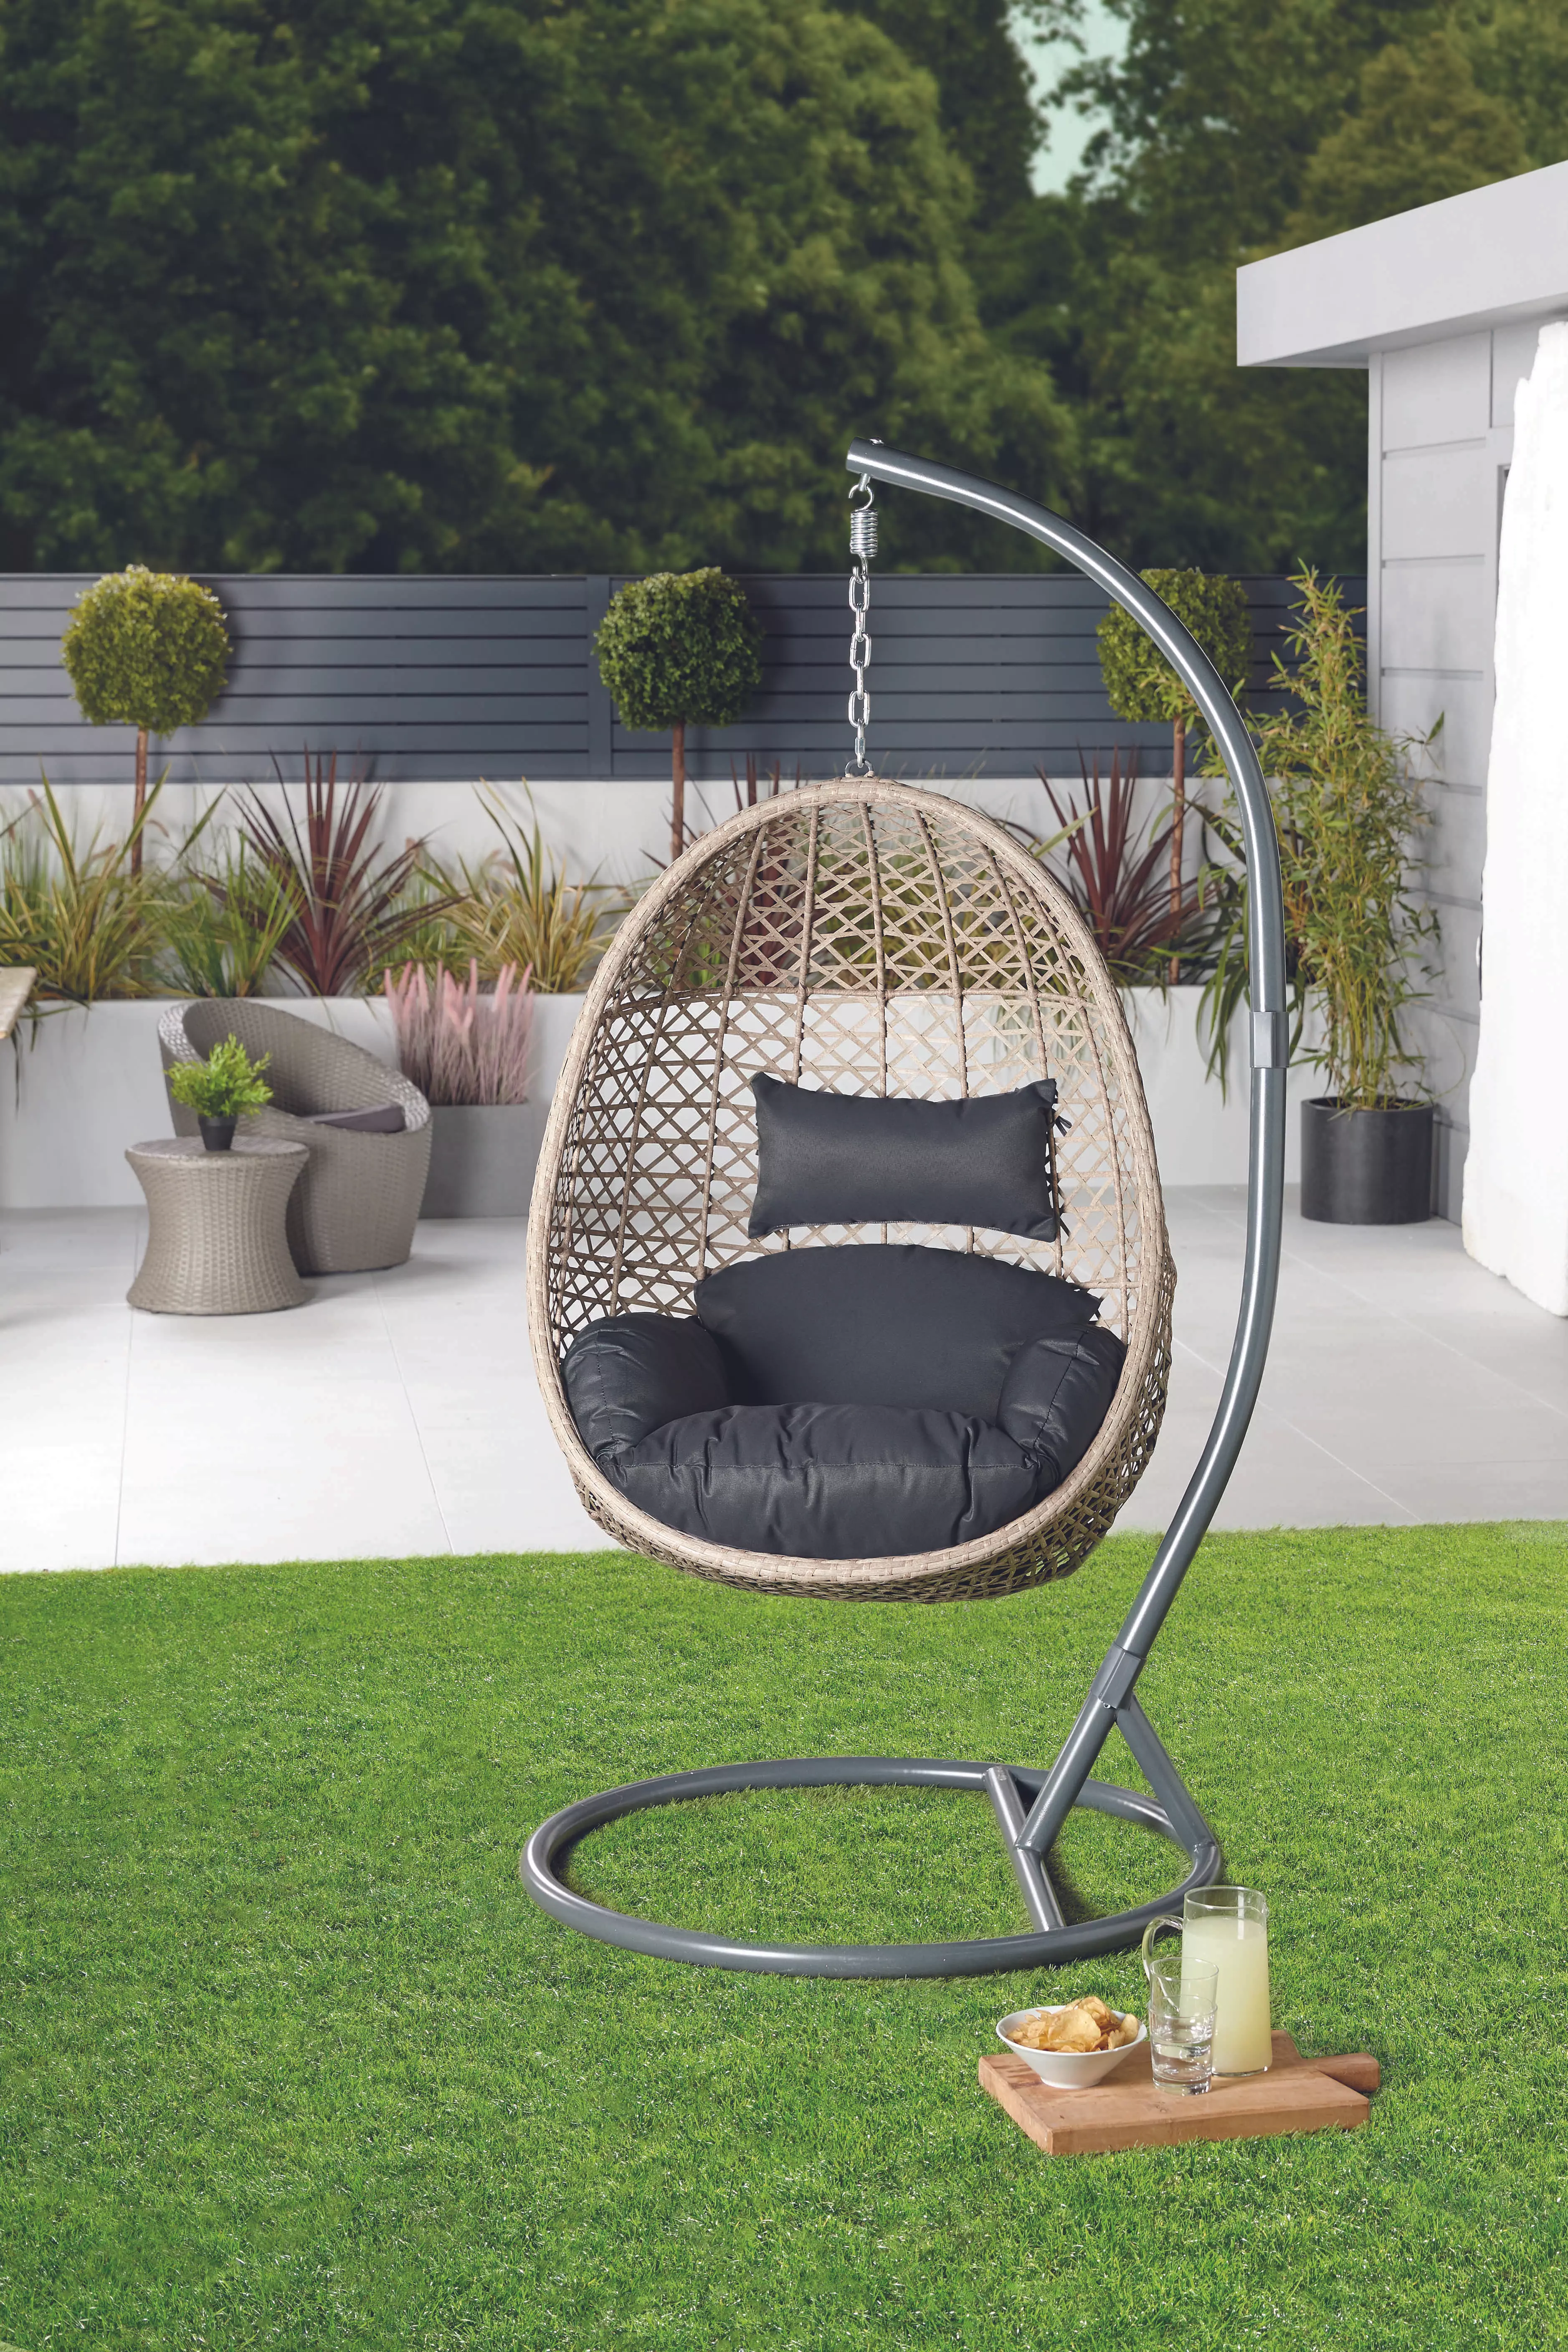 The egg chair is being sold at a steep price (